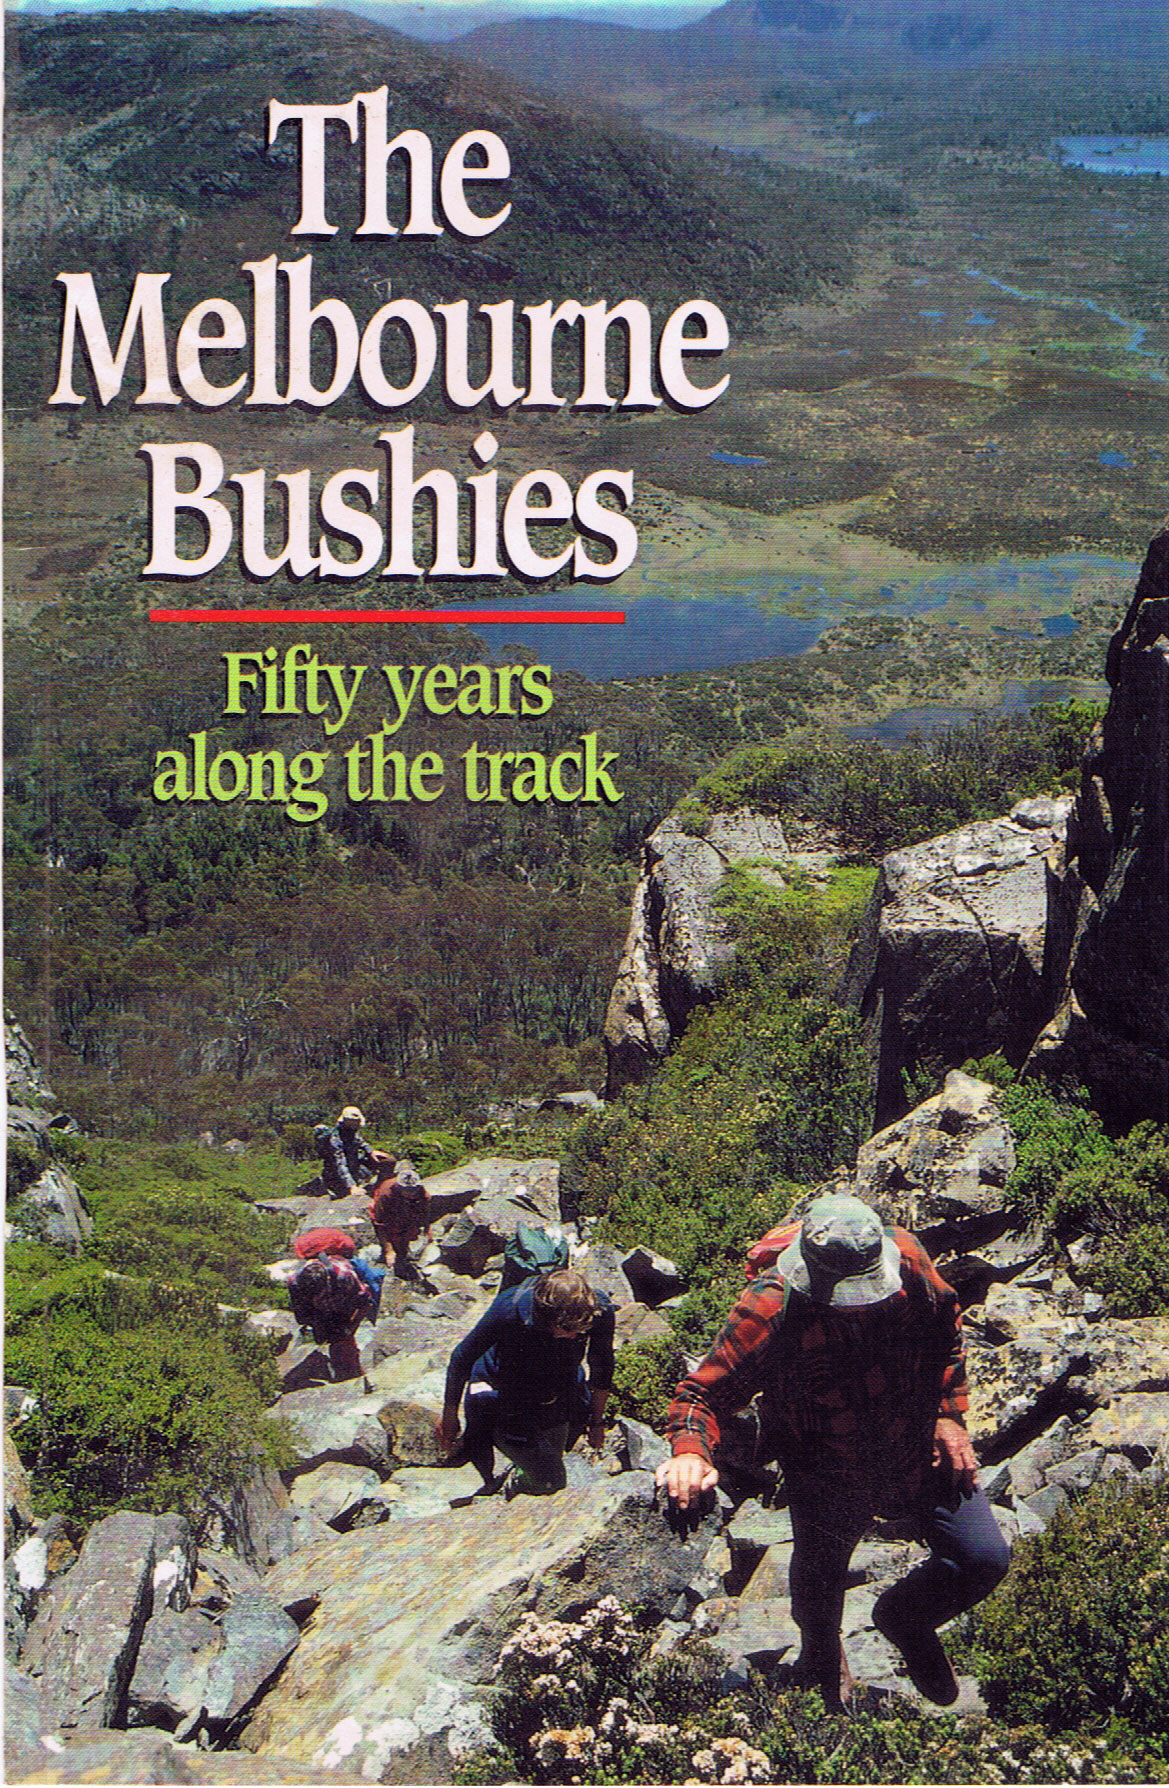 Book: "Melbourne Bushies - Fifty years along the track (1940-90)"